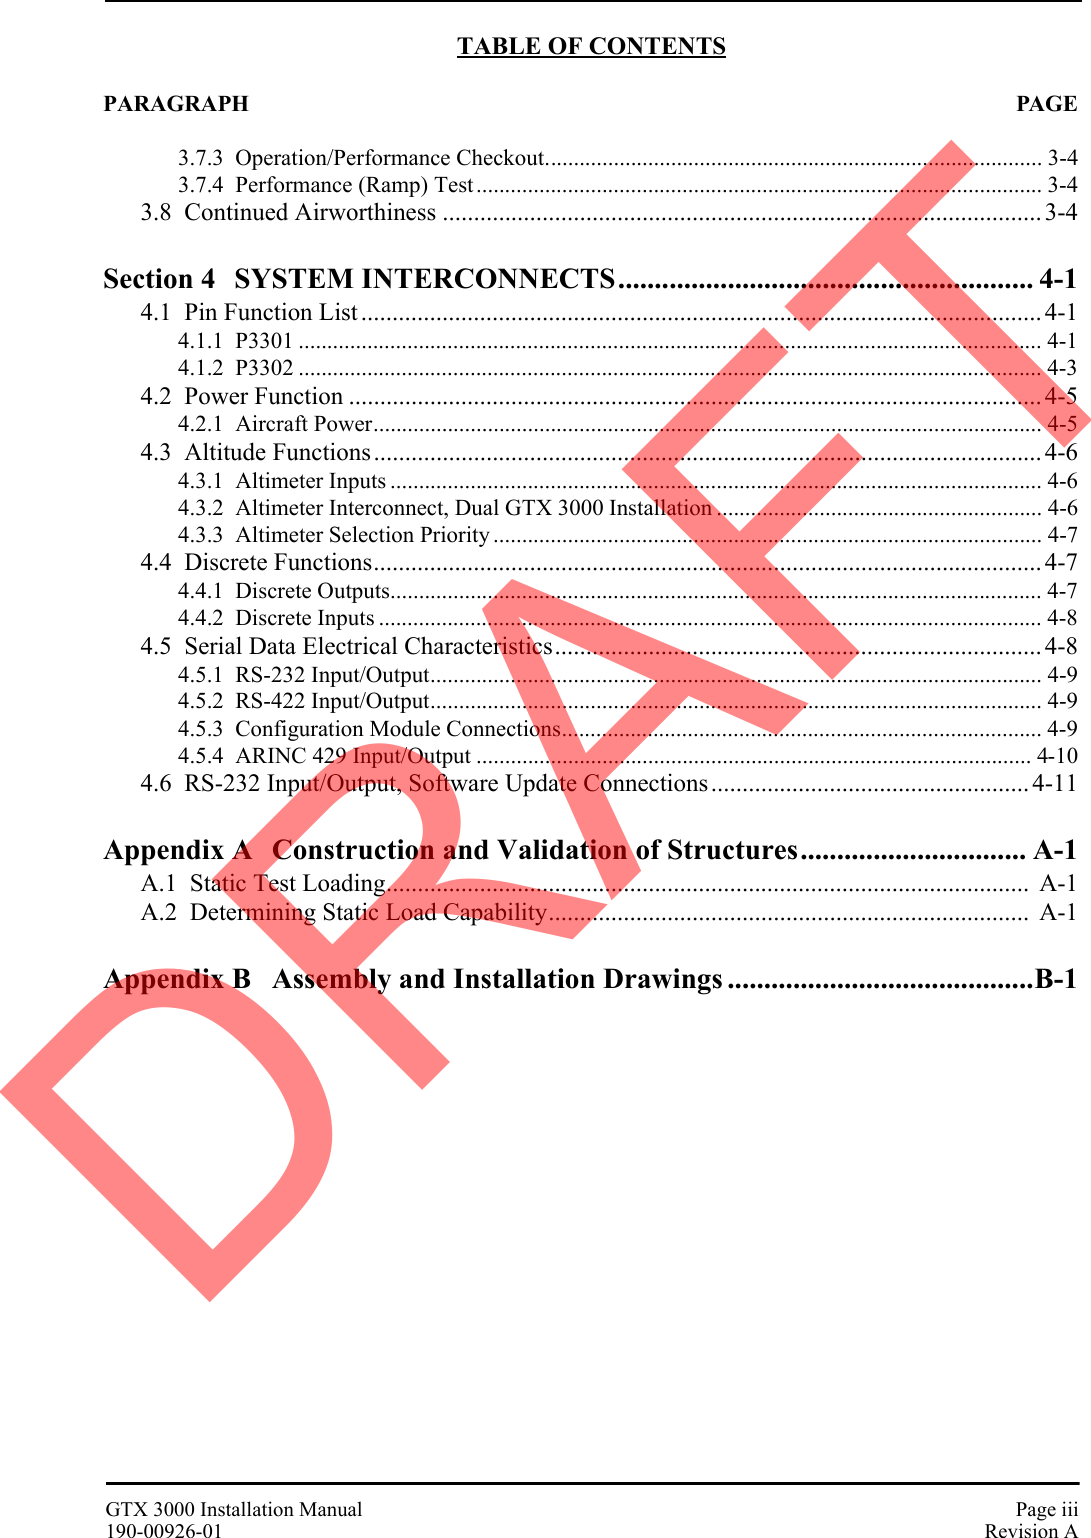 GTX 3000 Installation Manual Page iii190-00926-01 Revision ATABLE OF CONTENTSPARAGRAPH PAGE3.7.3  Operation/Performance Checkout....................................................................................... 3-43.7.4  Performance (Ramp) Test................................................................................................... 3-43.8  Continued Airworthiness ................................................................................................ 3-4Section 4 SYSTEM INTERCONNECTS......................................................... 4-14.1  Pin Function List ............................................................................................................. 4-14.1.1  P3301 .................................................................................................................................. 4-14.1.2  P3302 .................................................................................................................................. 4-34.2  Power Function ............................................................................................................... 4-54.2.1  Aircraft Power..................................................................................................................... 4-54.3  Altitude Functions........................................................................................................... 4-64.3.1  Altimeter Inputs .................................................................................................................. 4-64.3.2  Altimeter Interconnect, Dual GTX 3000 Installation ......................................................... 4-64.3.3  Altimeter Selection Priority ................................................................................................ 4-74.4  Discrete Functions........................................................................................................... 4-74.4.1  Discrete Outputs.................................................................................................................. 4-74.4.2  Discrete Inputs .................................................................................................................... 4-84.5  Serial Data Electrical Characteristics.............................................................................. 4-84.5.1  RS-232 Input/Output........................................................................................................... 4-94.5.2  RS-422 Input/Output........................................................................................................... 4-94.5.3  Configuration Module Connections.................................................................................... 4-94.5.4  ARINC 429 Input/Output ................................................................................................. 4-104.6  RS-232 Input/Output, Software Update Connections................................................... 4-11Appendix A Construction and Validation of Structures............................... A-1A.1  Static Test Loading.......................................................................................................  A-1A.2  Determining Static Load Capability.............................................................................  A-1Appendix B Assembly and Installation Drawings ..........................................B-1DRAFT